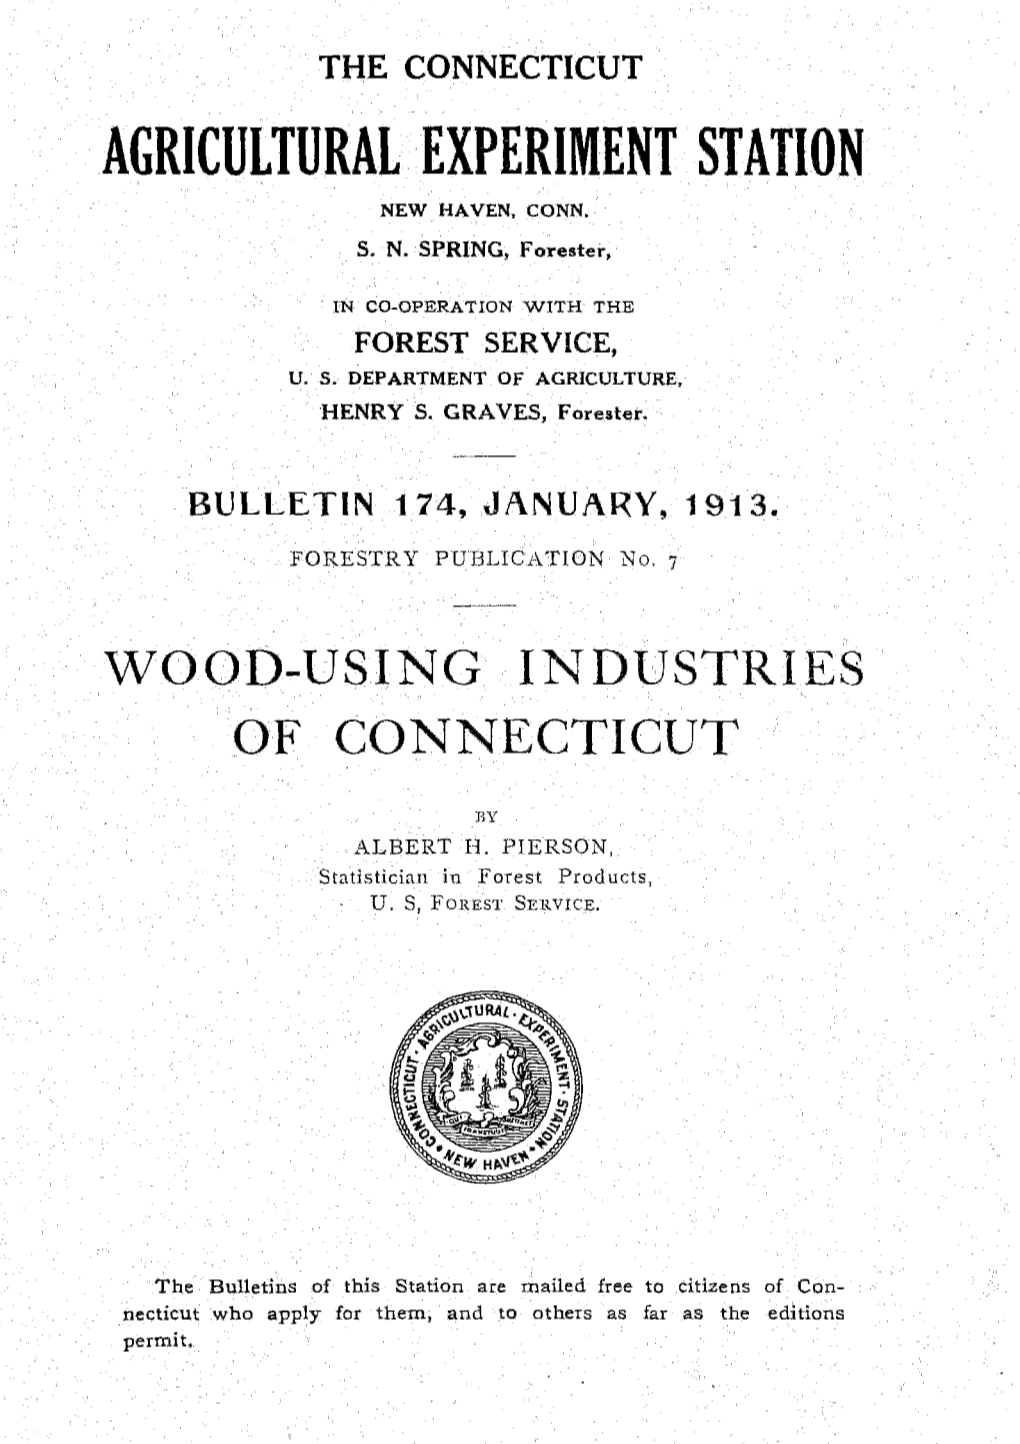 B174 (1913) Wood-Using Industries of Connecticut